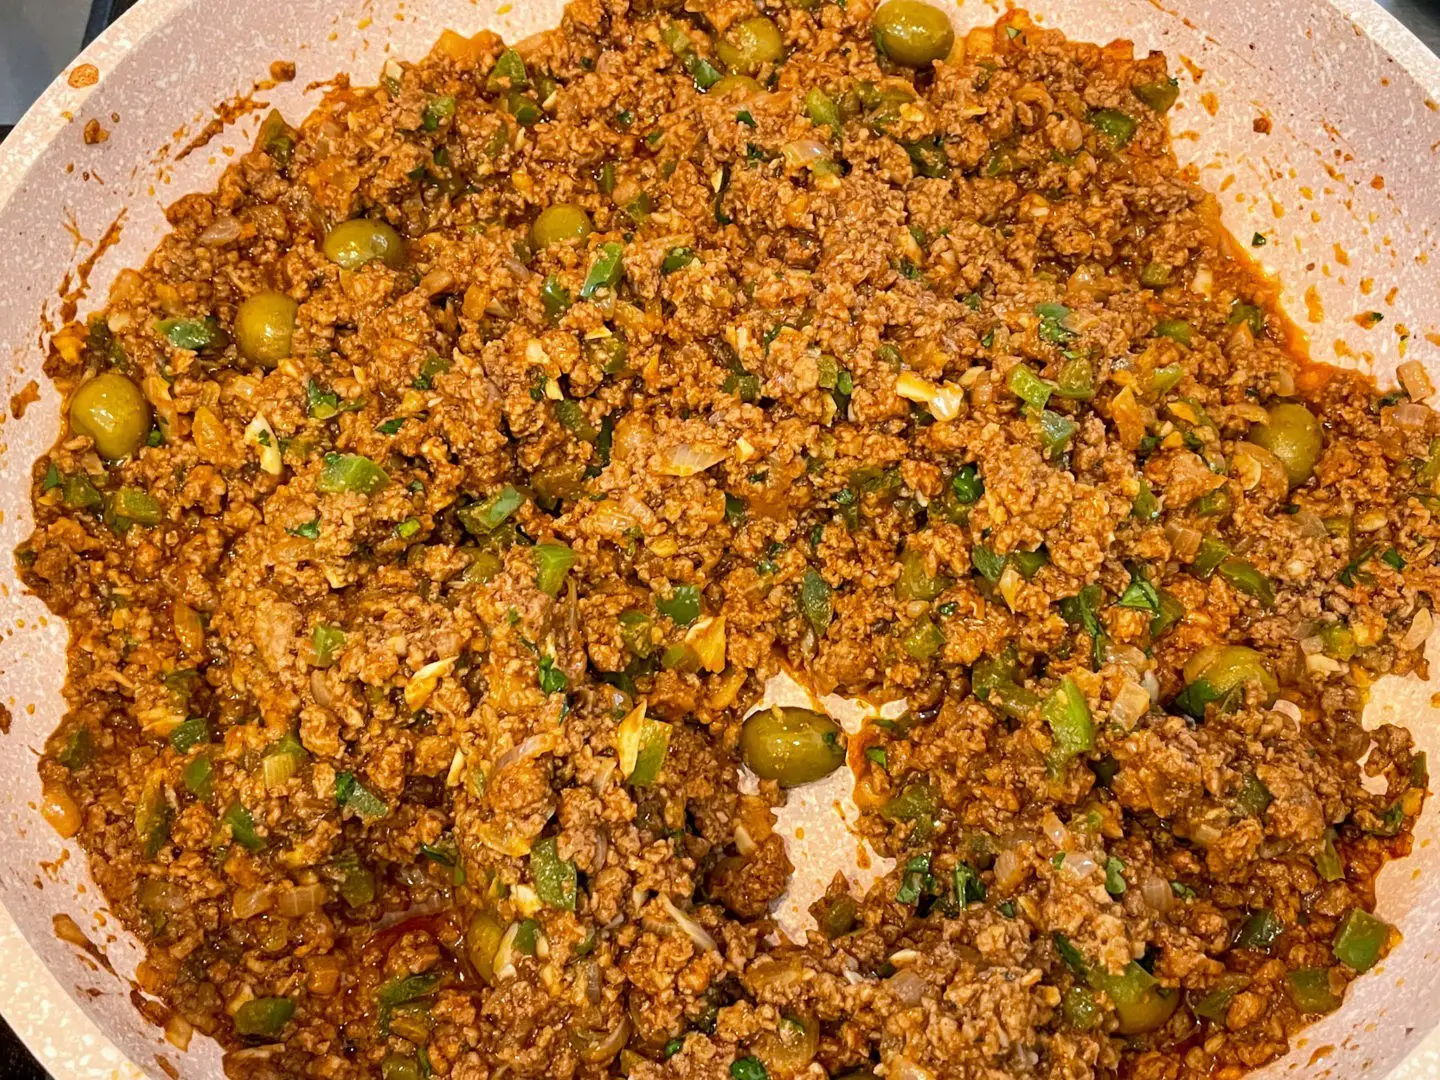 Cooked picadillo in pan.